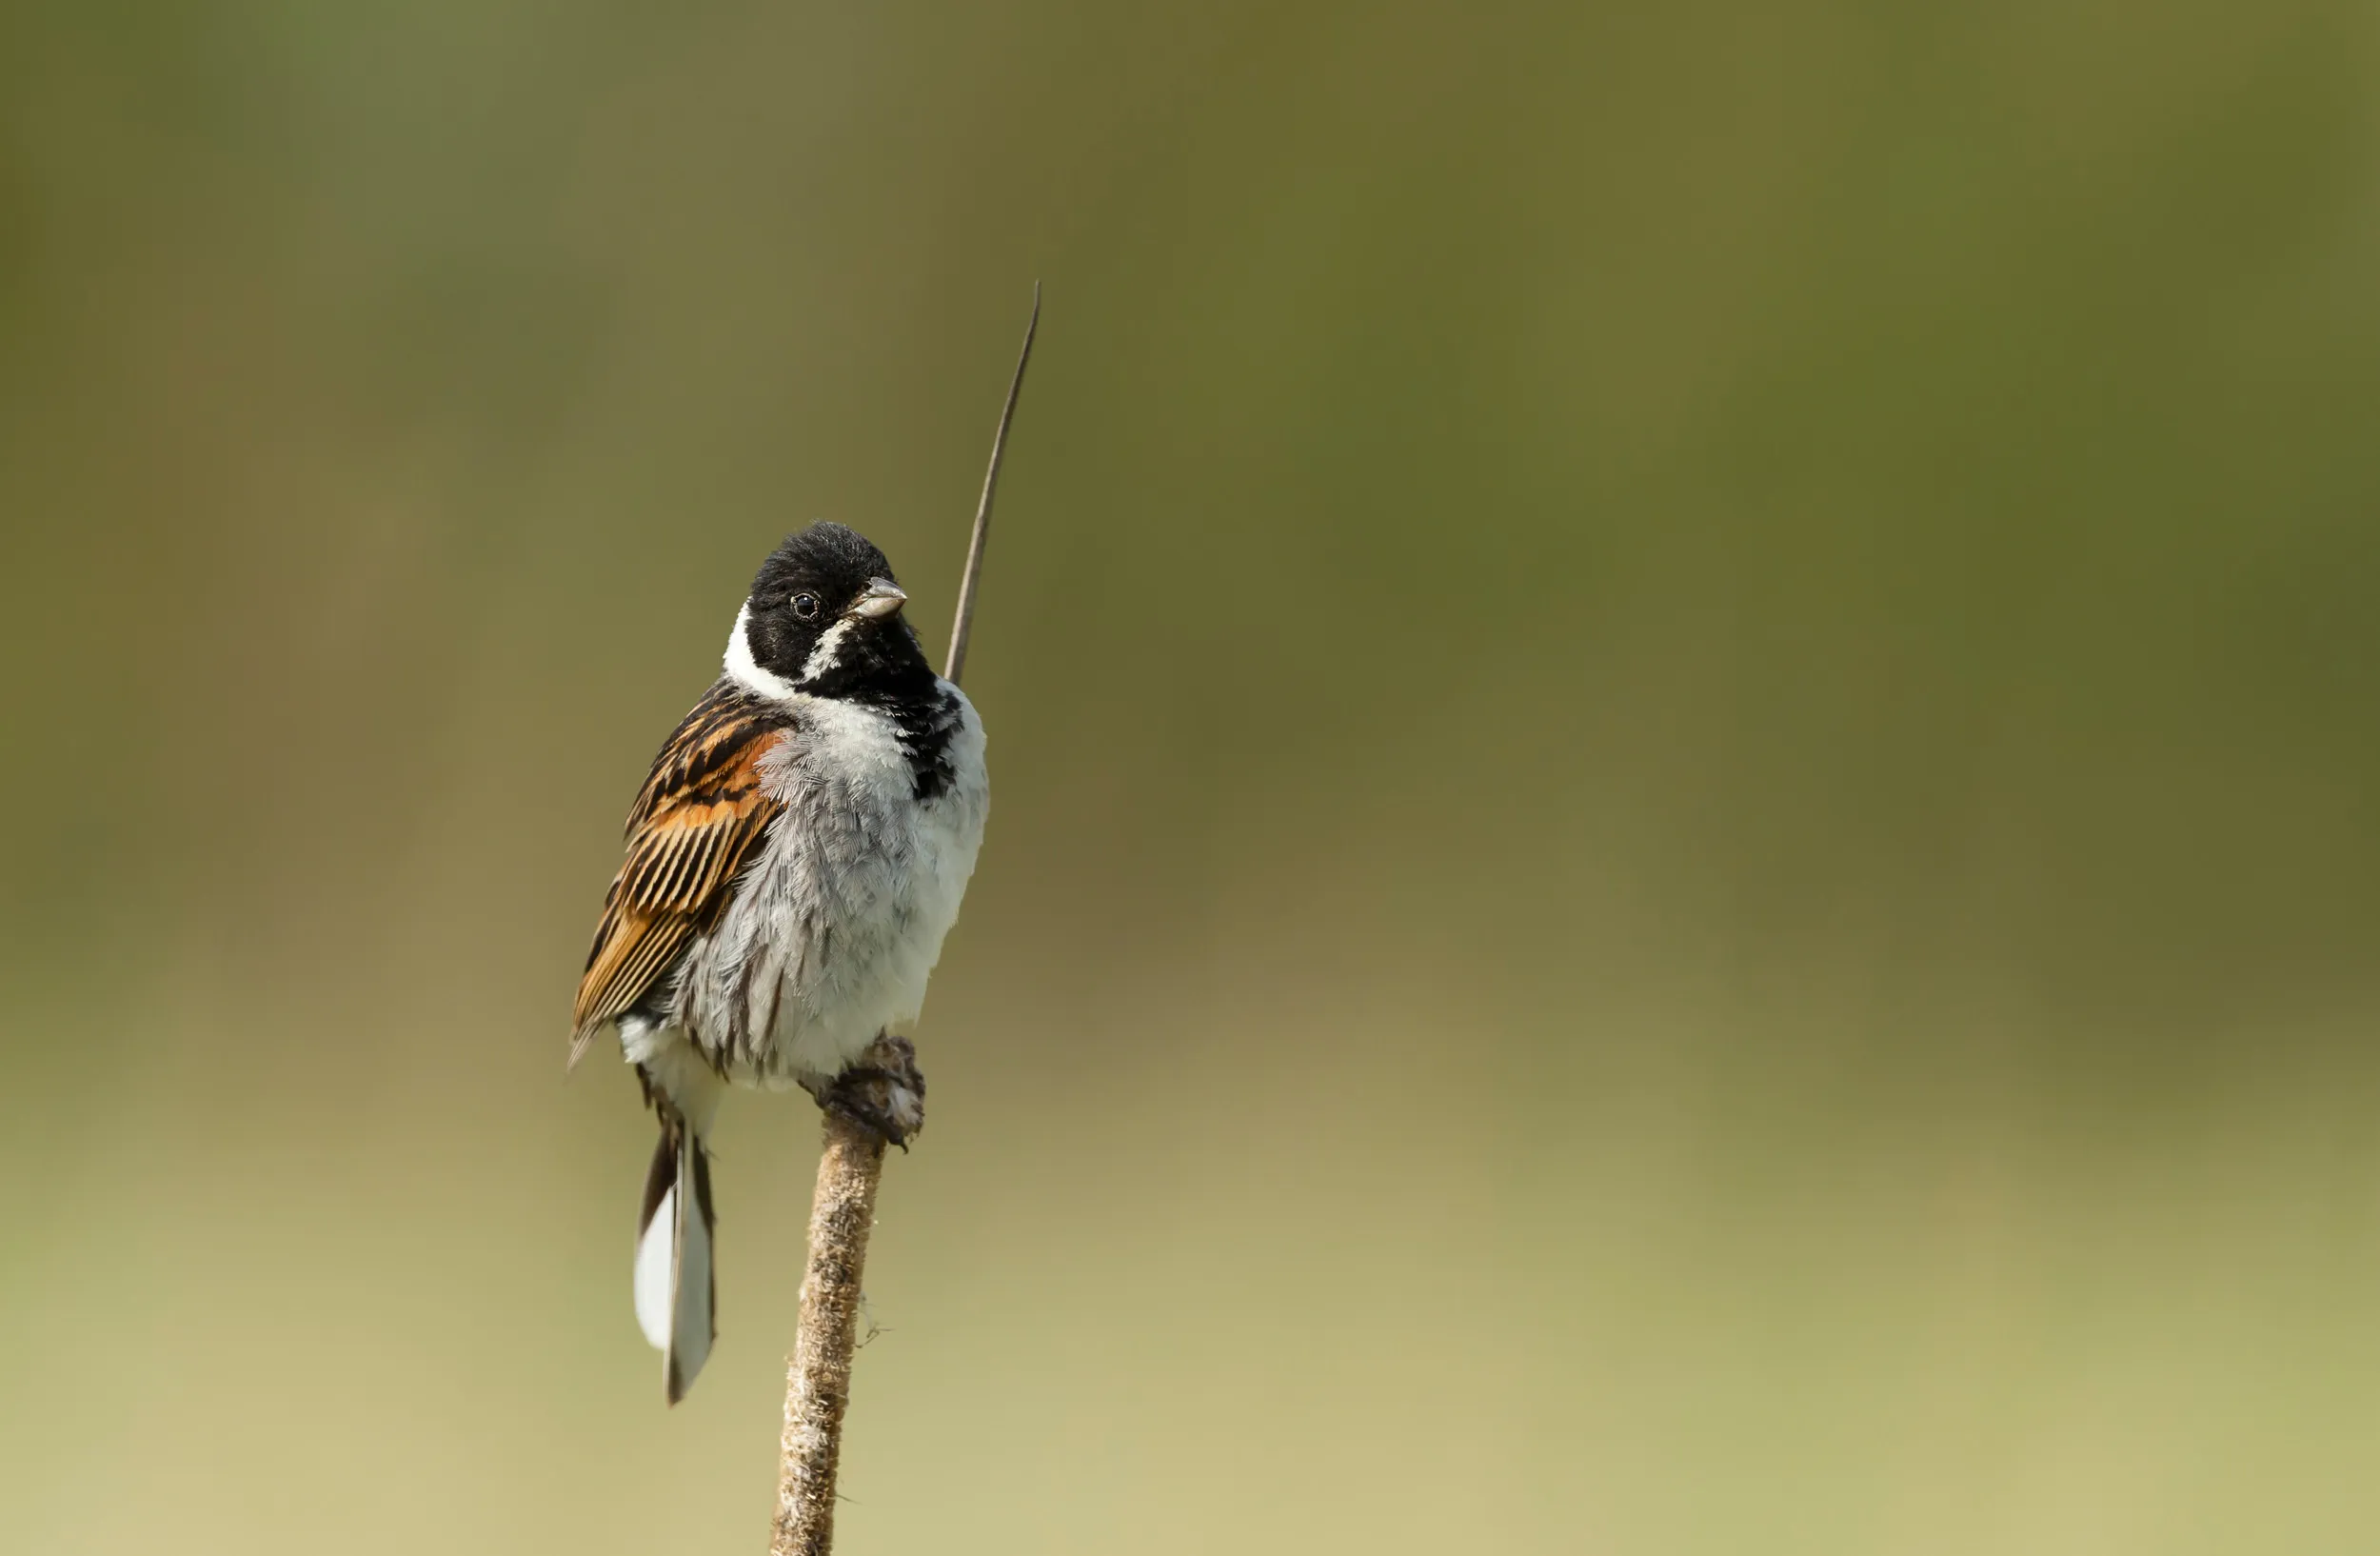 A lone Reed Bunting perched on a twig.